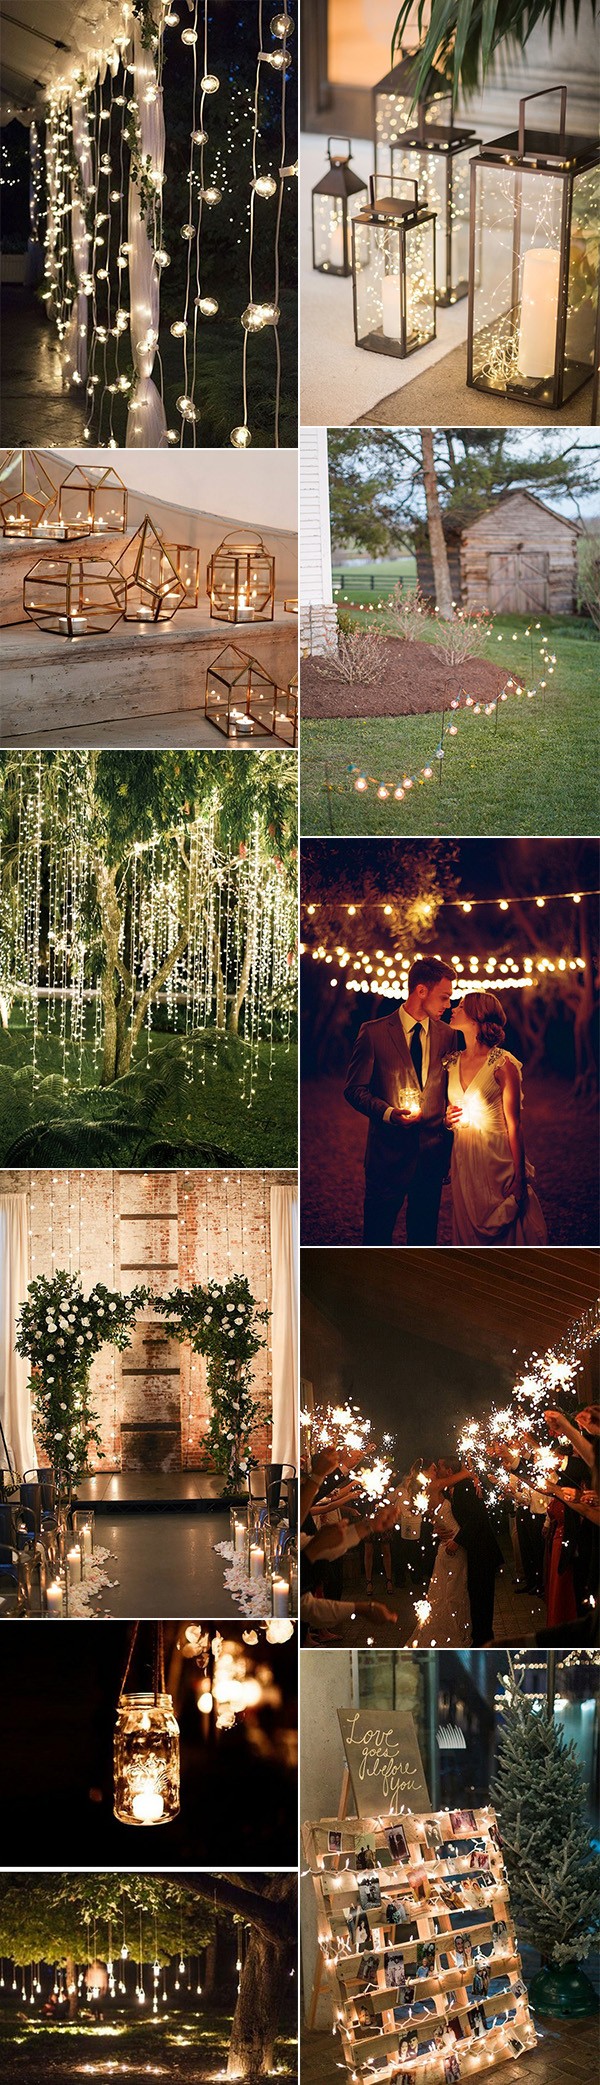 outdoor wedding decoration ideas with lights